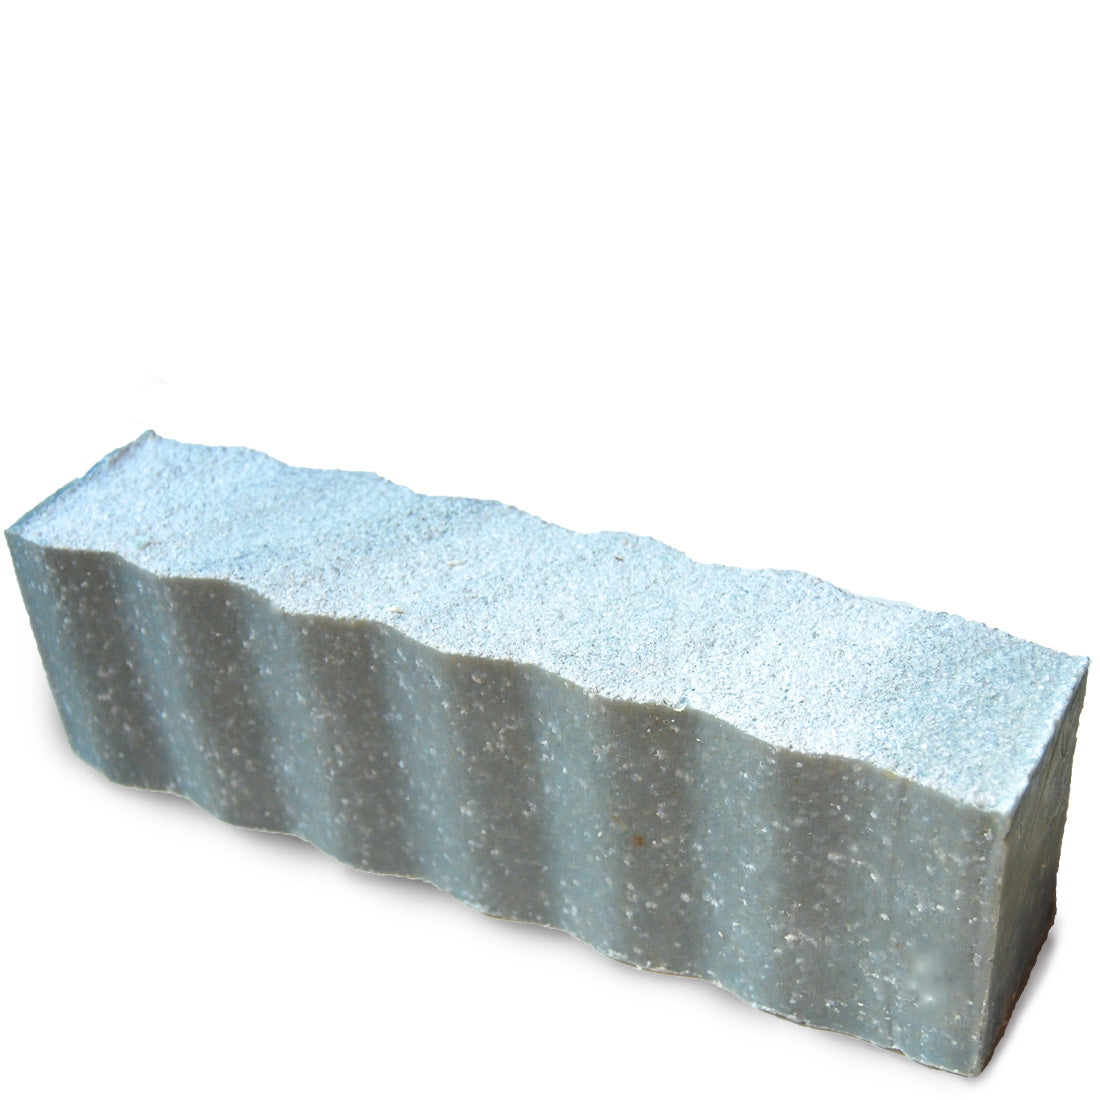 Light blue colored  and speckled with sea salt wavy rectangular 45 ounce brick of citrus scented Zum Bar Soap